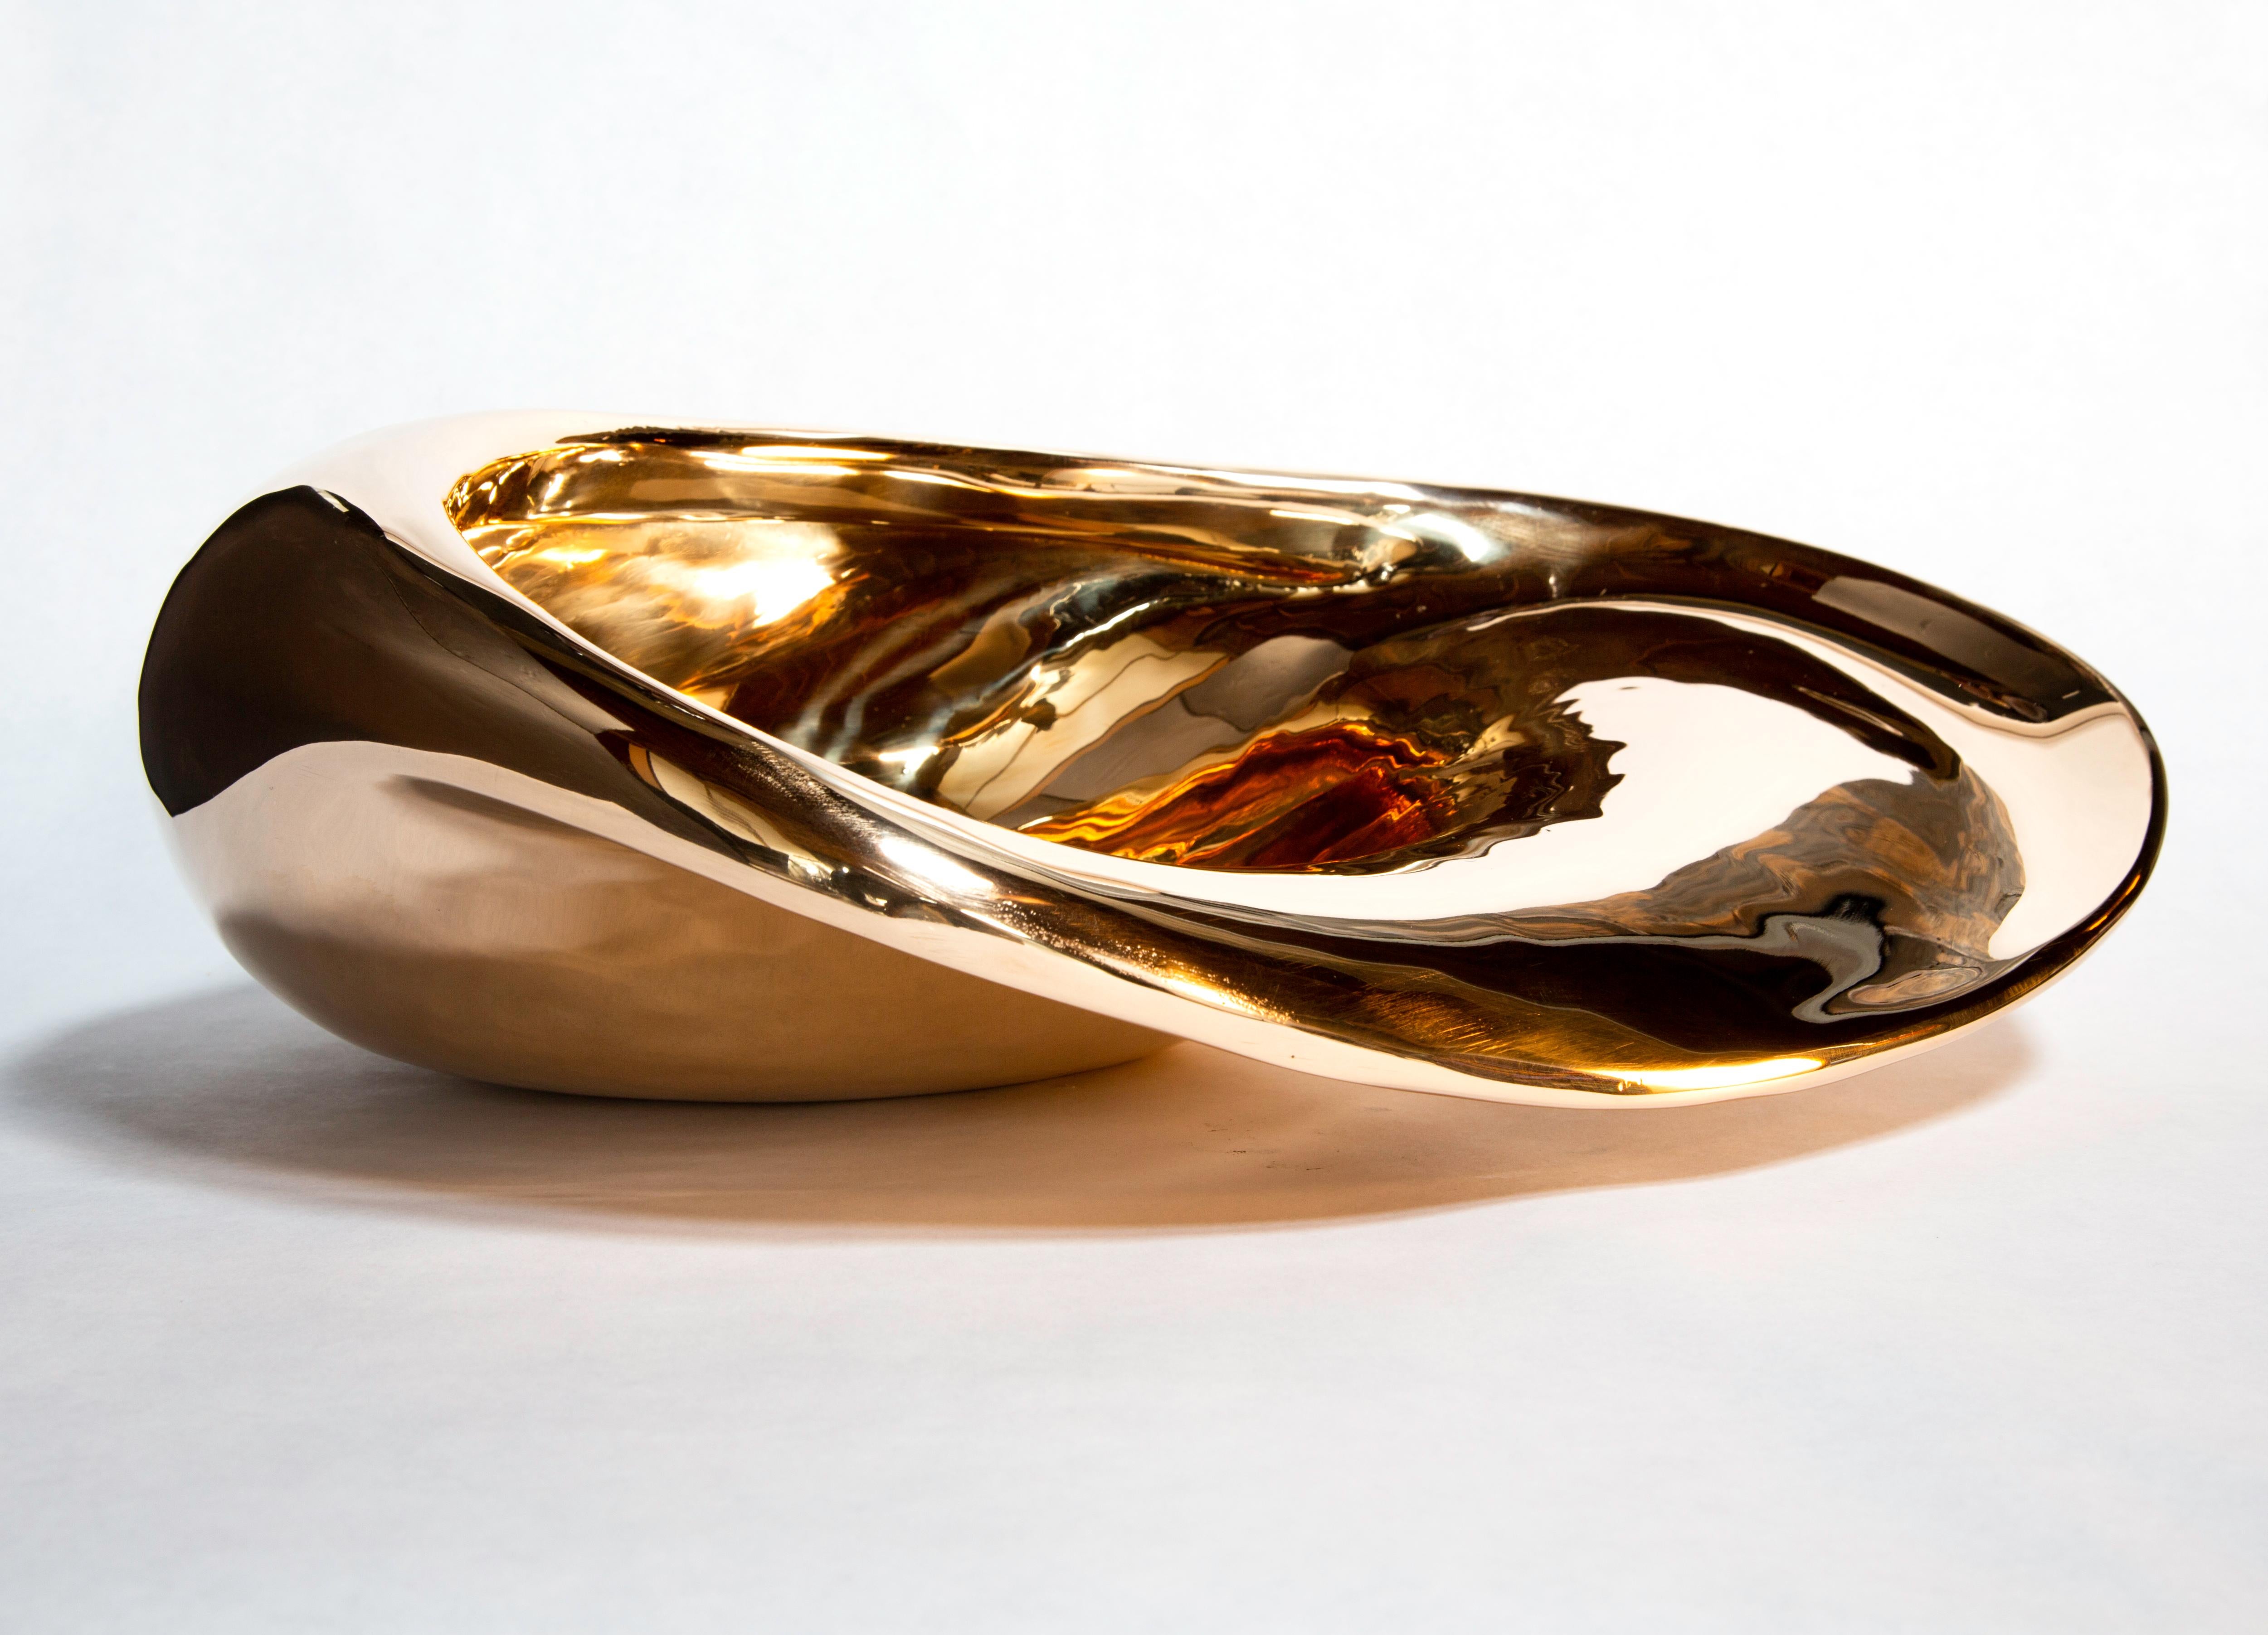 H57 Bowl / Vase in Patinated Recycled Cast Red Bronze, by Jordan Mozer, USA 2007 For Sale 9